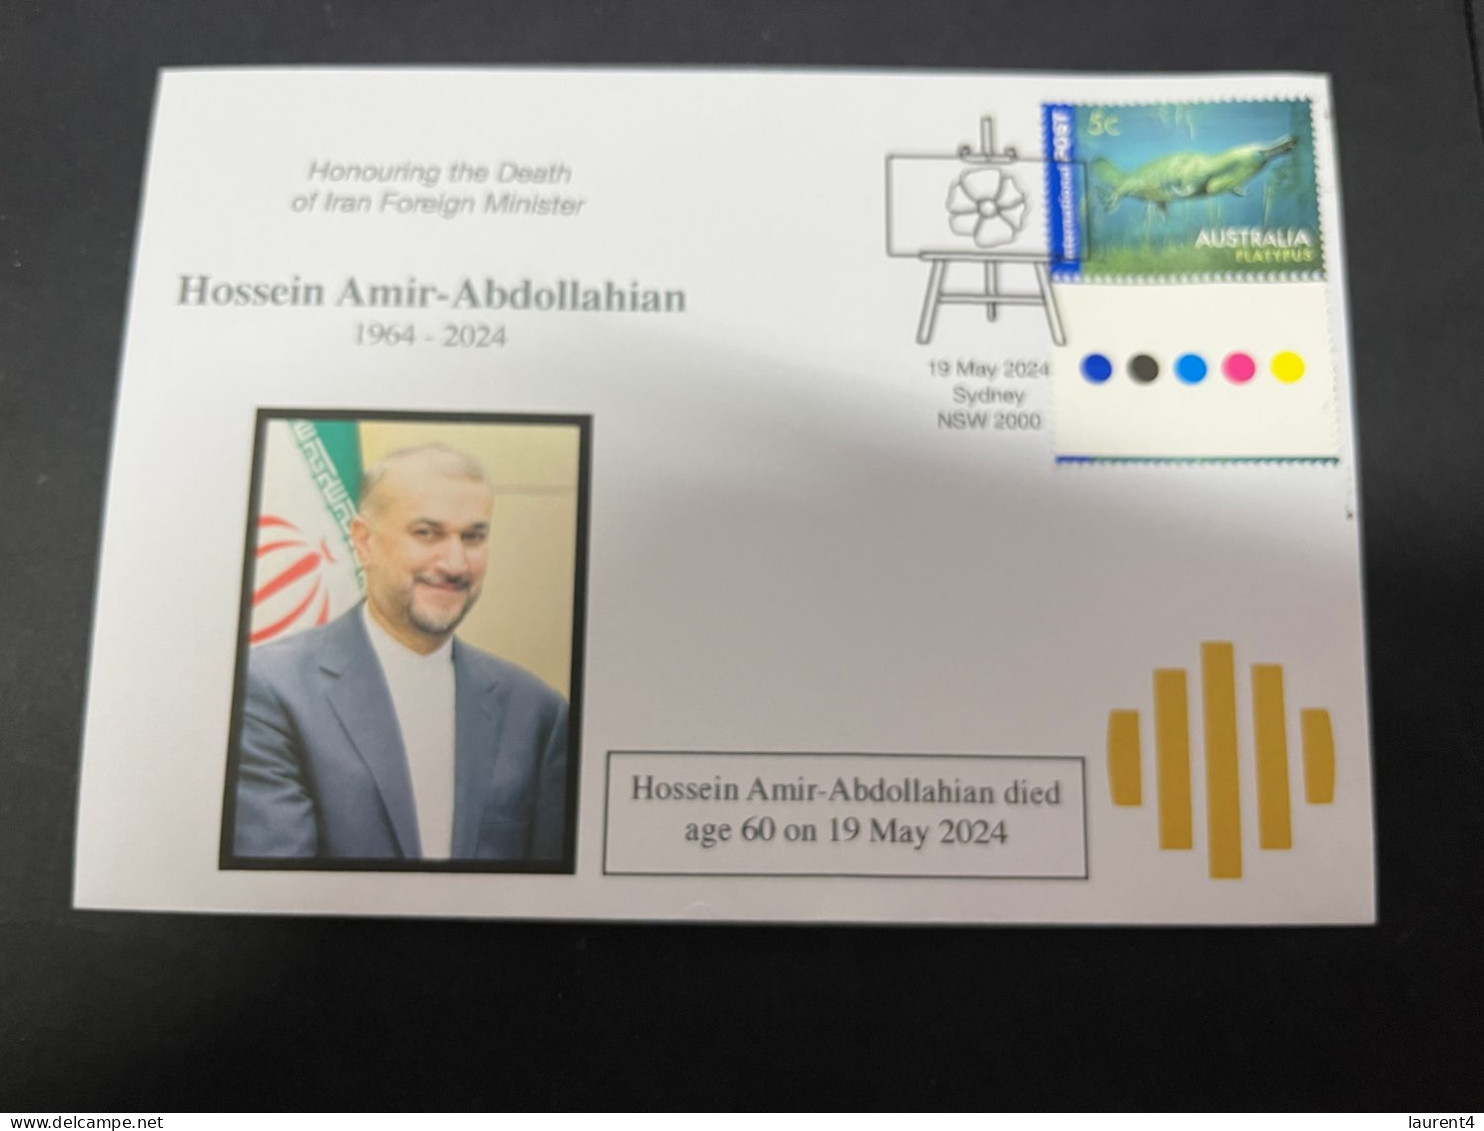 21-5-2024 (5 Z 42) Death Of Iran Foreign Minister Hossein Amir-Abdollahian In A Helicopter Crash (OZ Stamp) - Iran